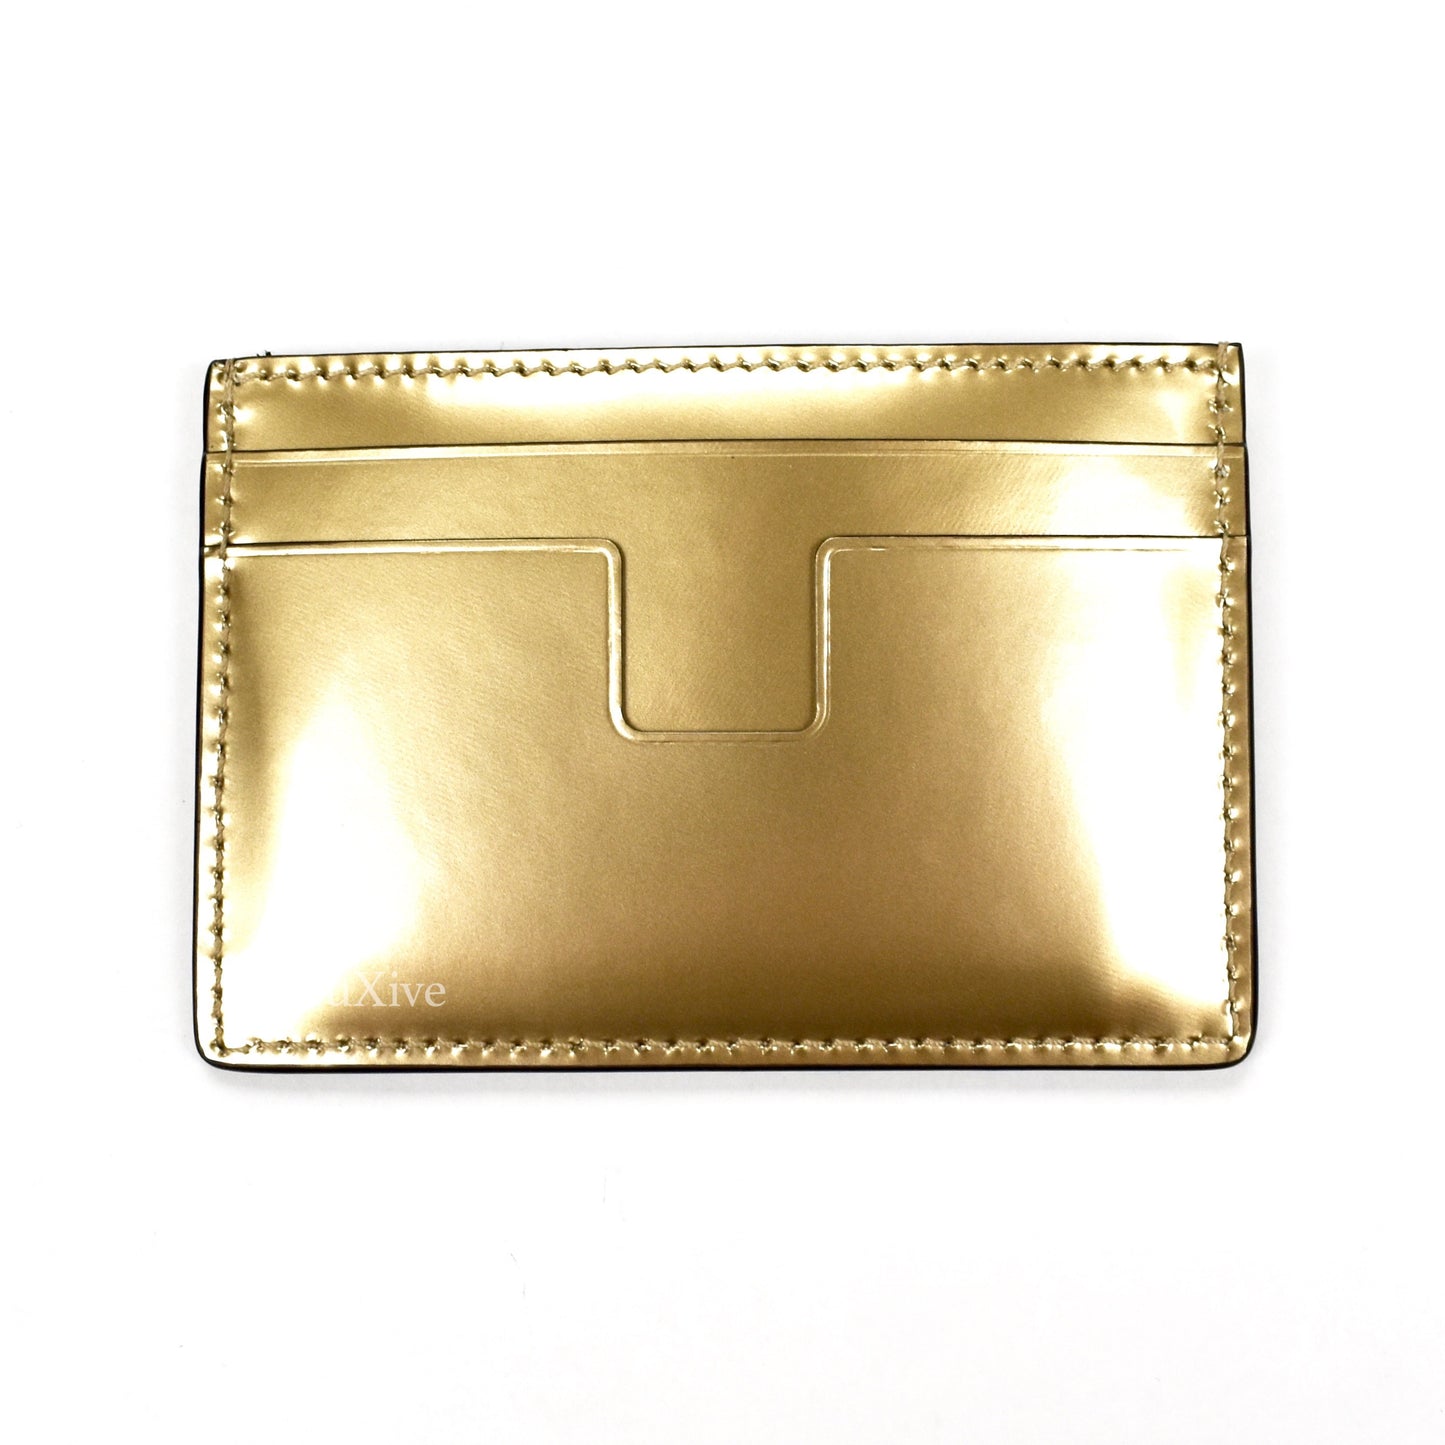 Tom Ford - Metallic Gold Leather Card Holder